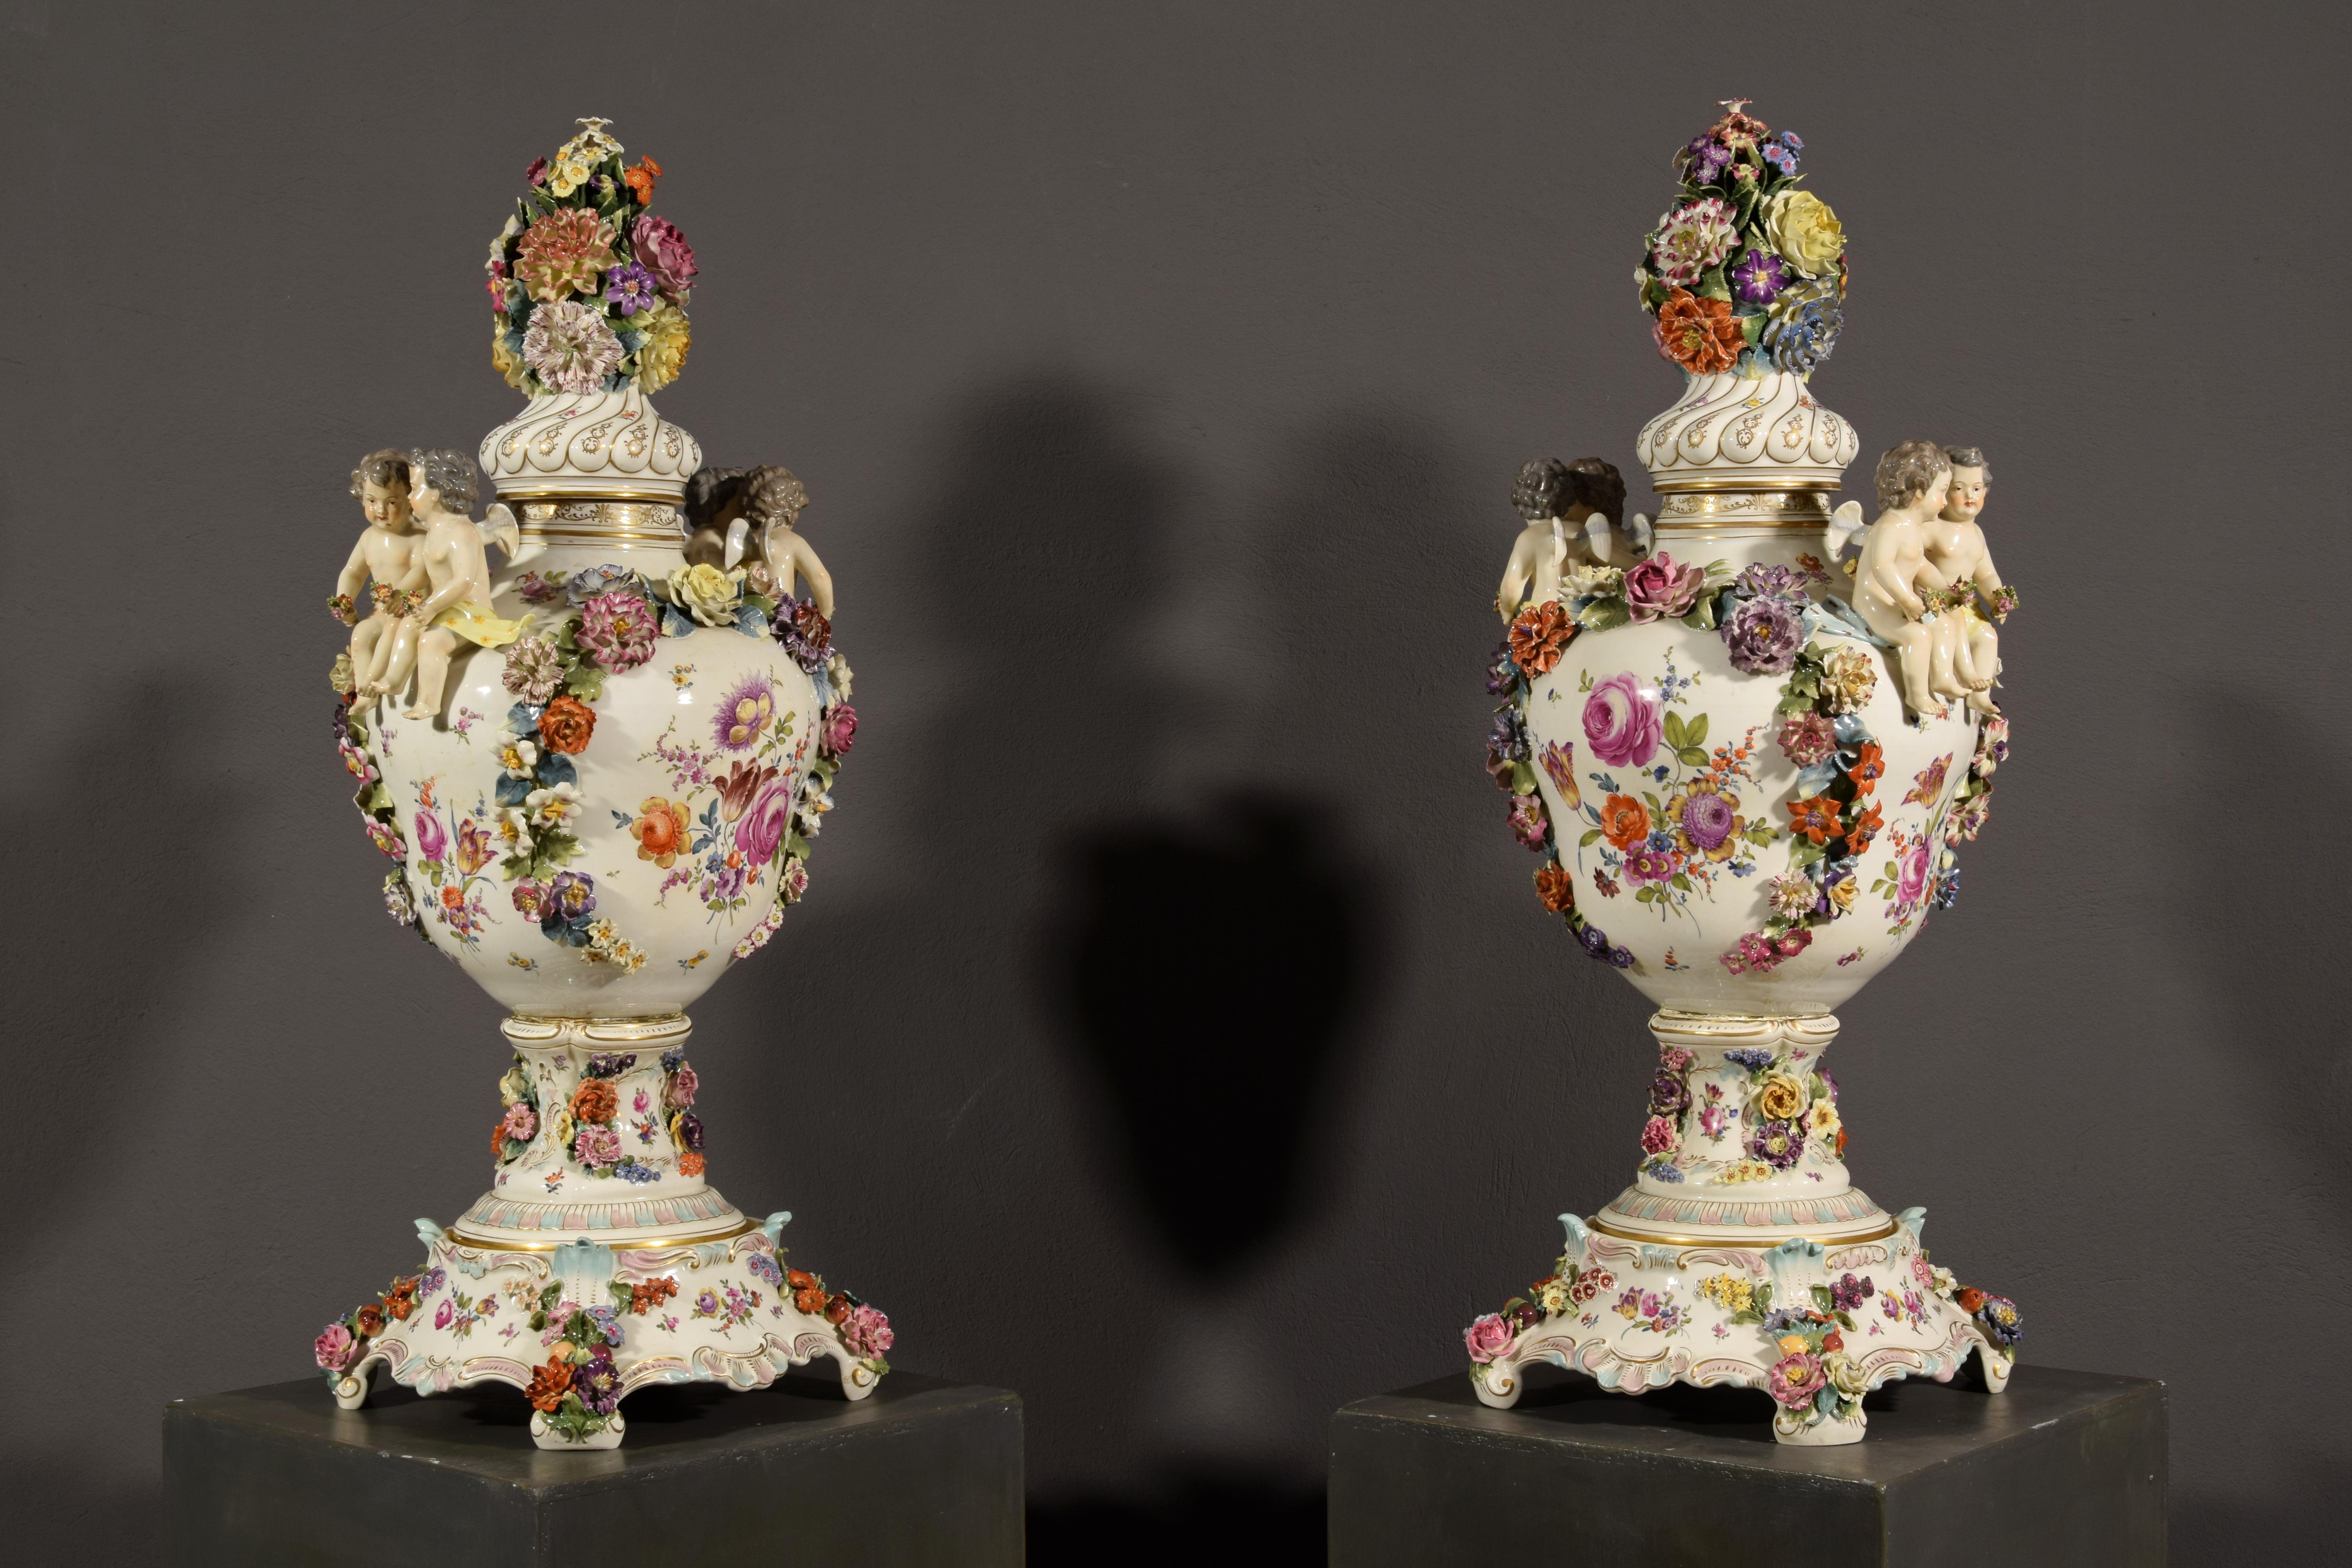 19th Century Pair of German Polychrome Porcelain Vases For Sale 8